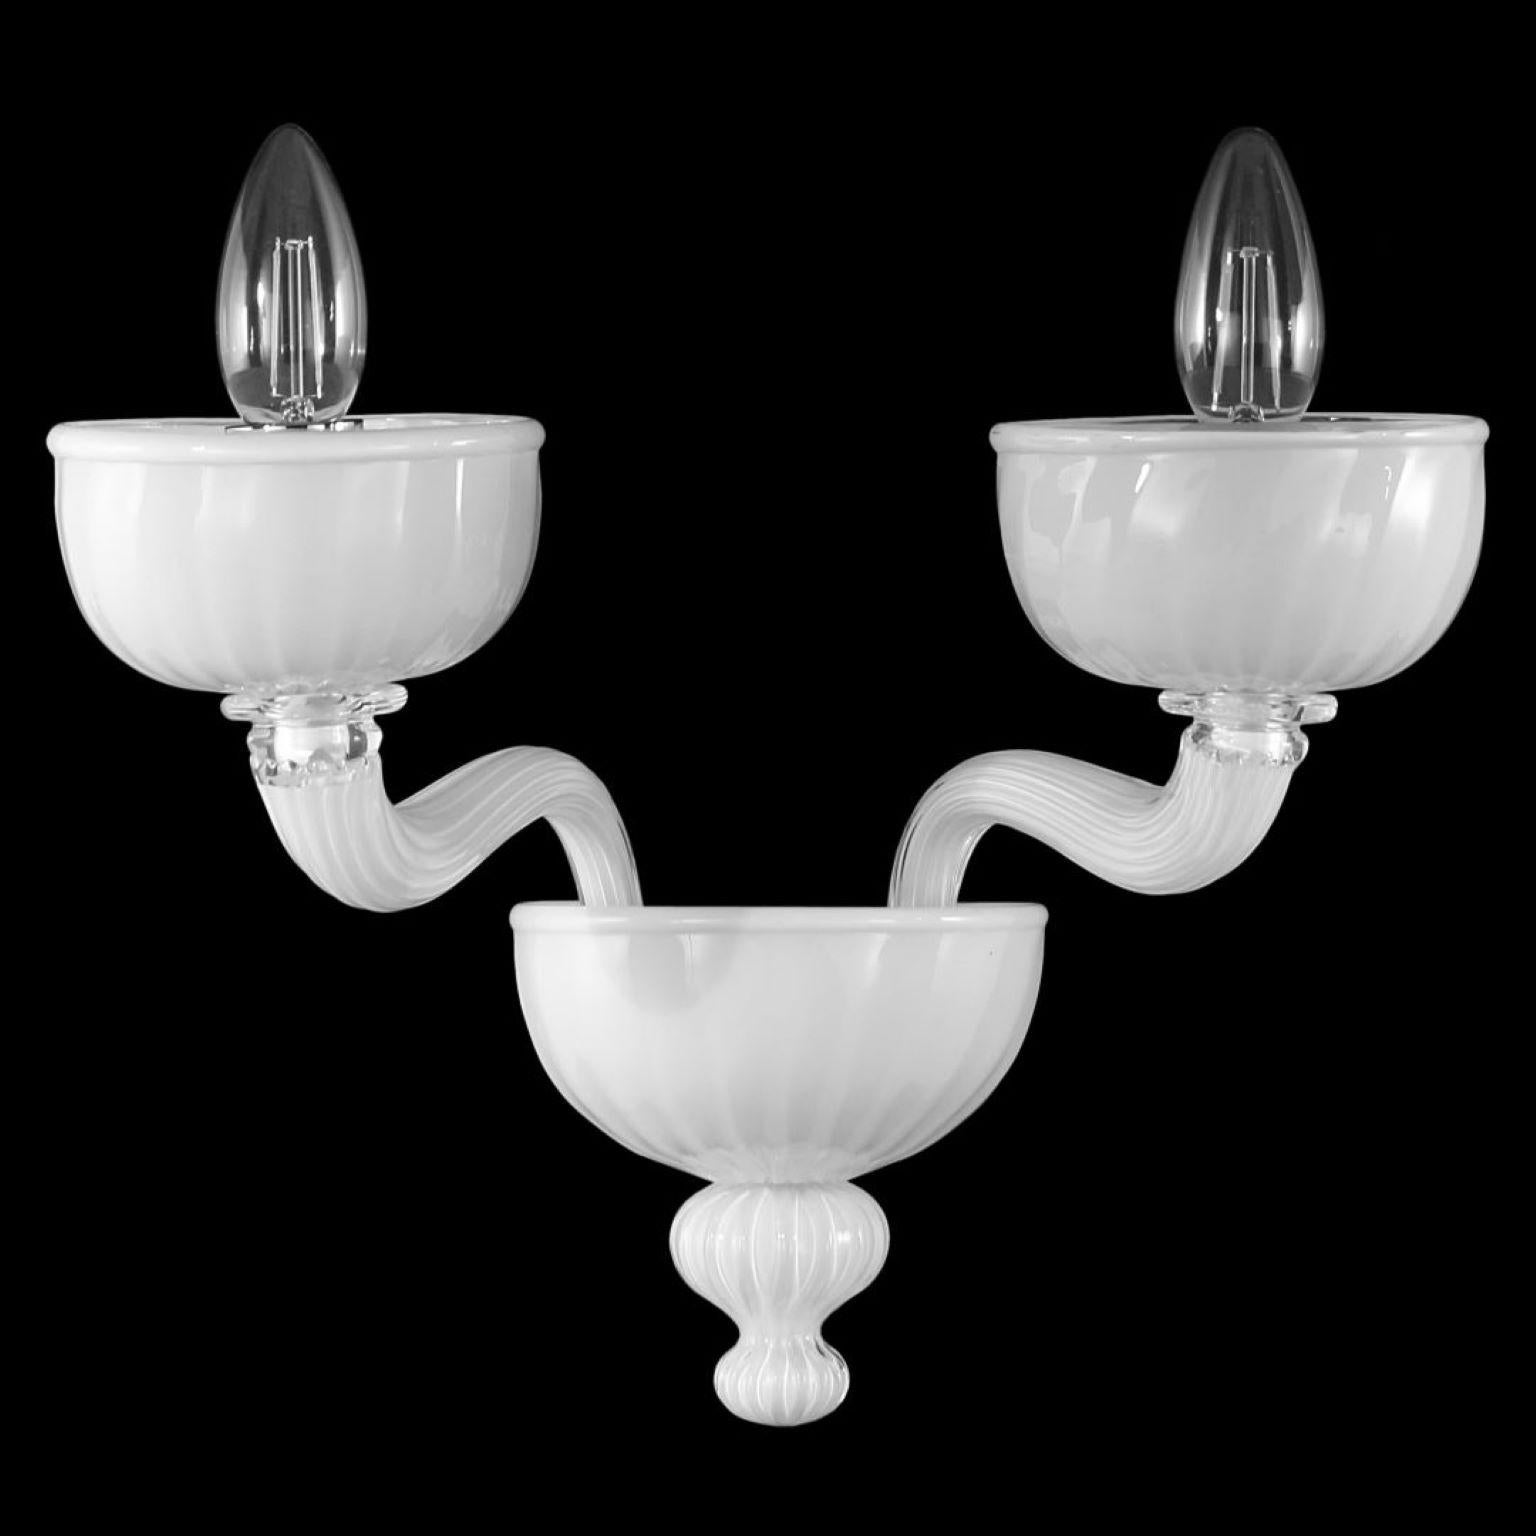 Rigadin sconce 2 arms white Murano glass by Multiforme
Edgar collection stands out thanks to its harmonious and balanced shapes. It has a clean structure, whose elements are perfectly proportioned.
All the elements that form either the sconces or